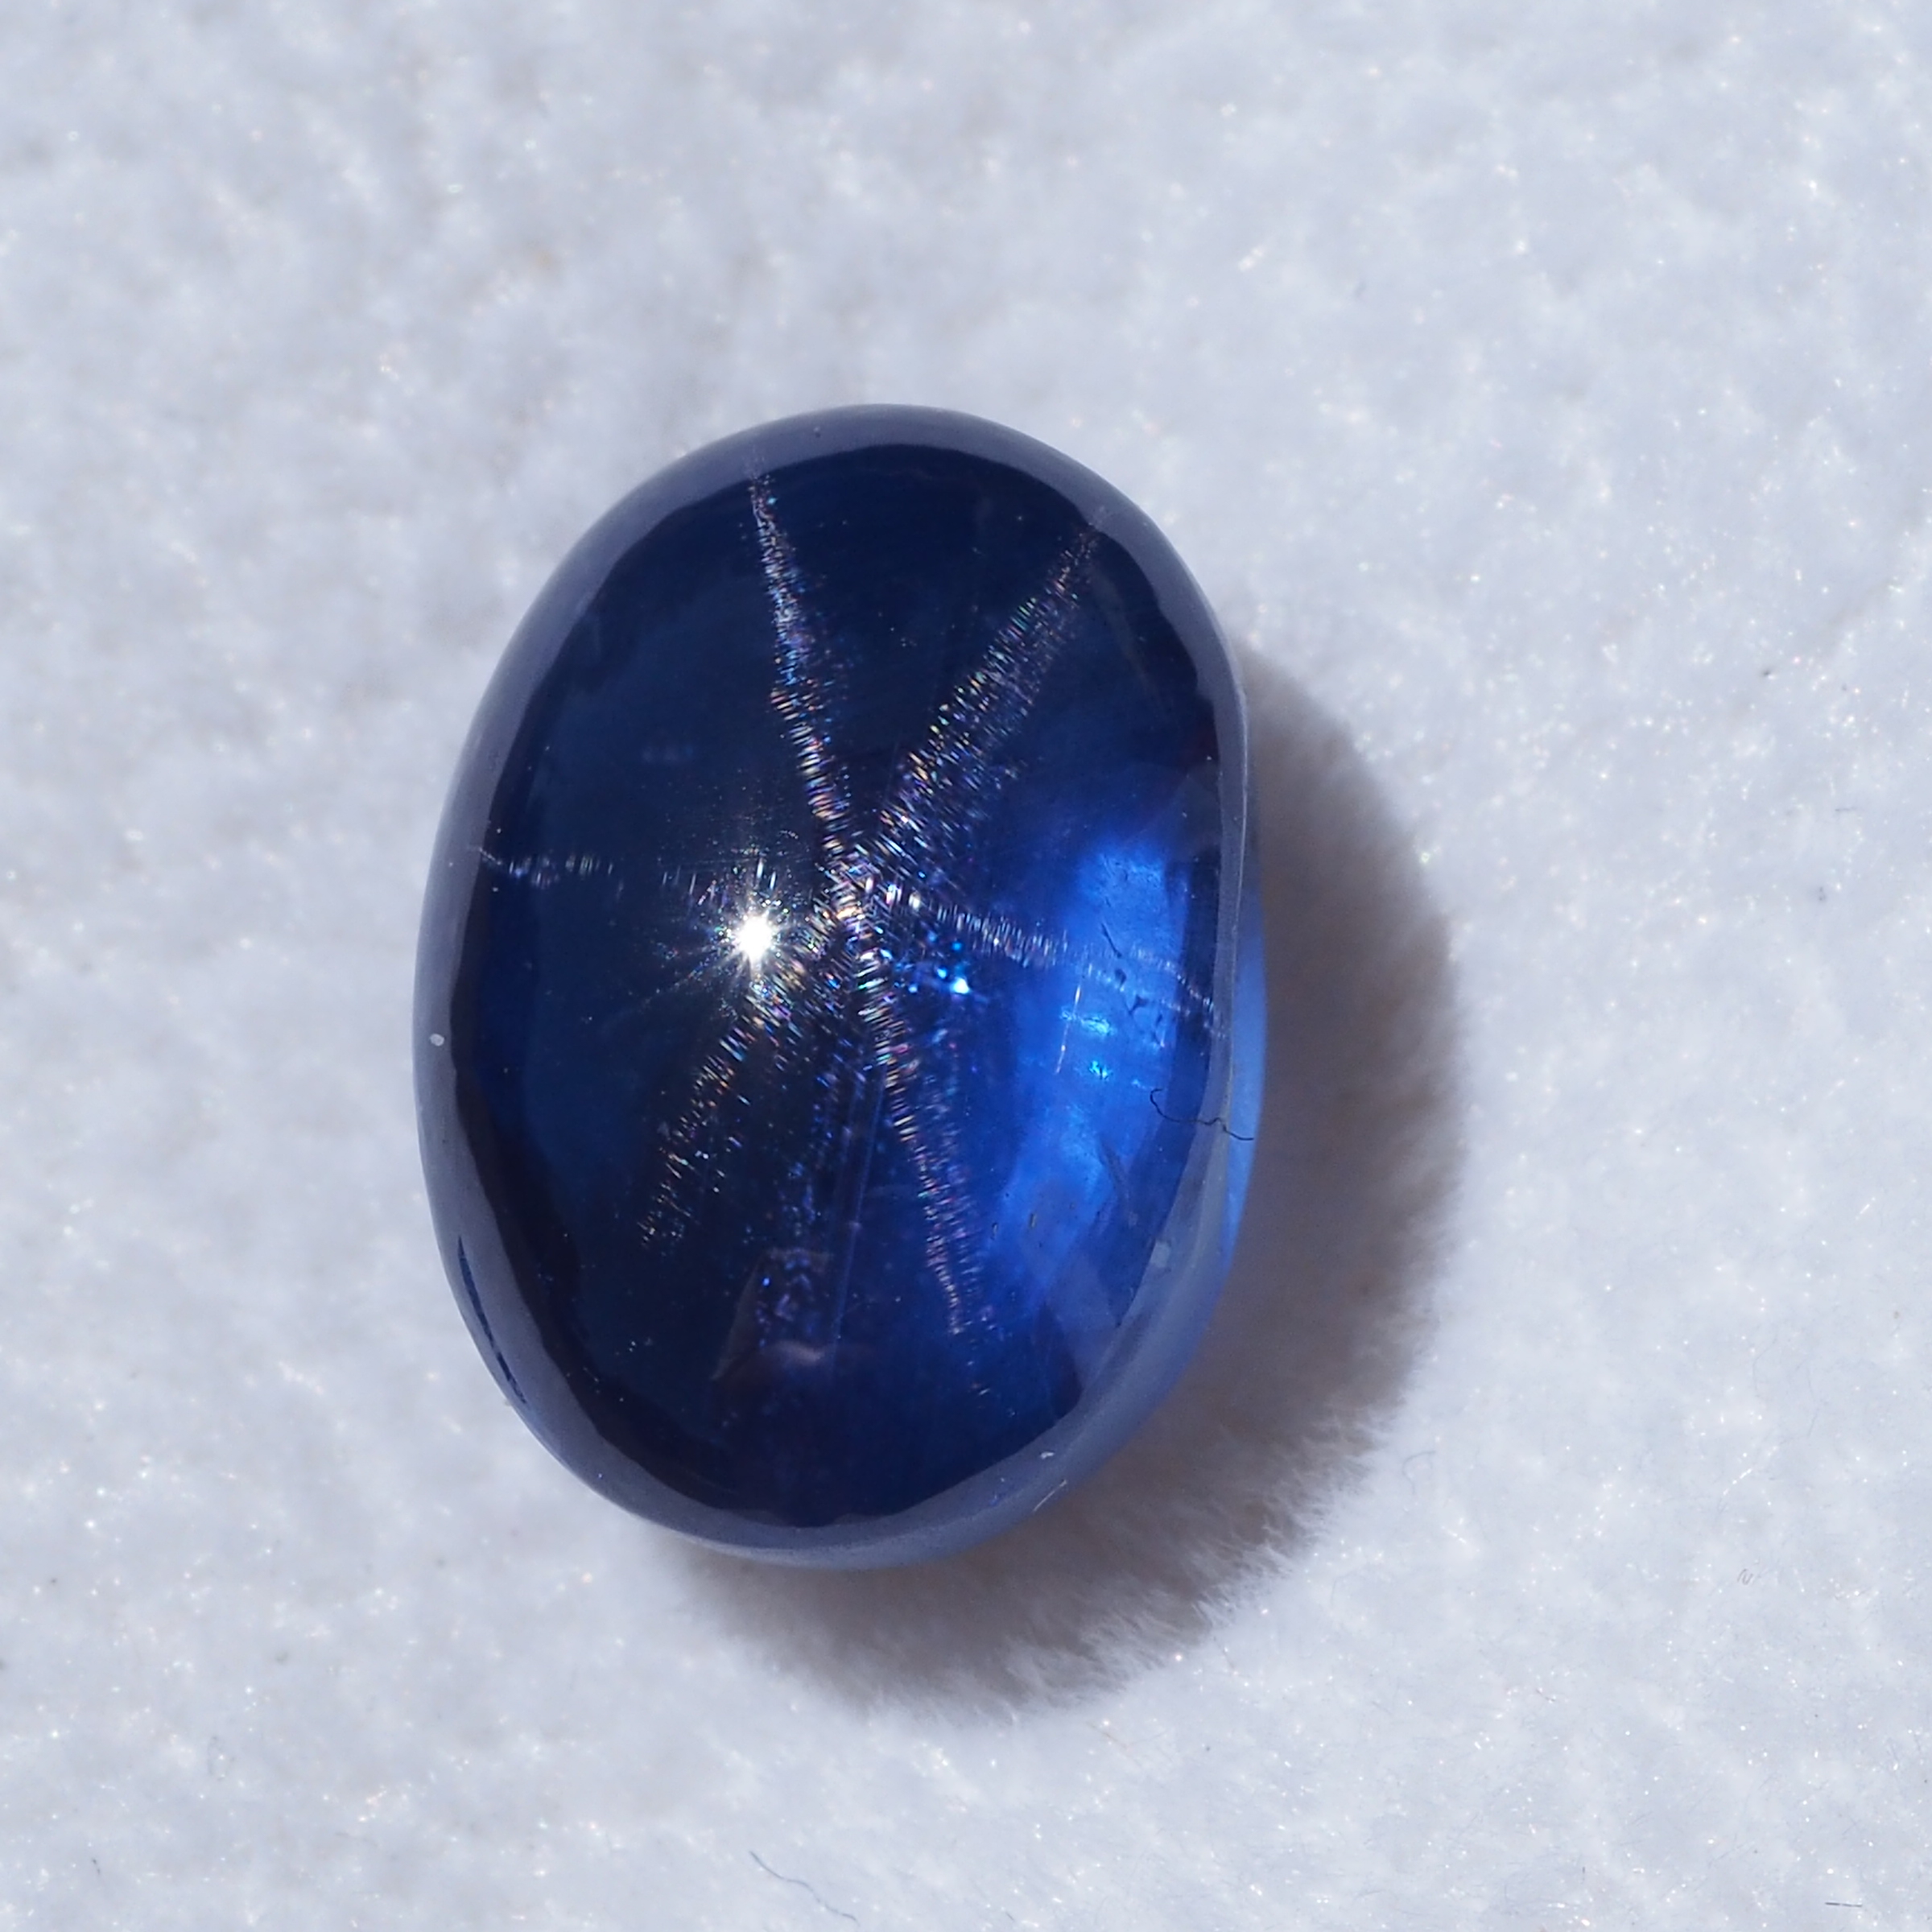 8 carat Blue Star Sapphire - Top Gem Quality Natural Loose Untreated ...